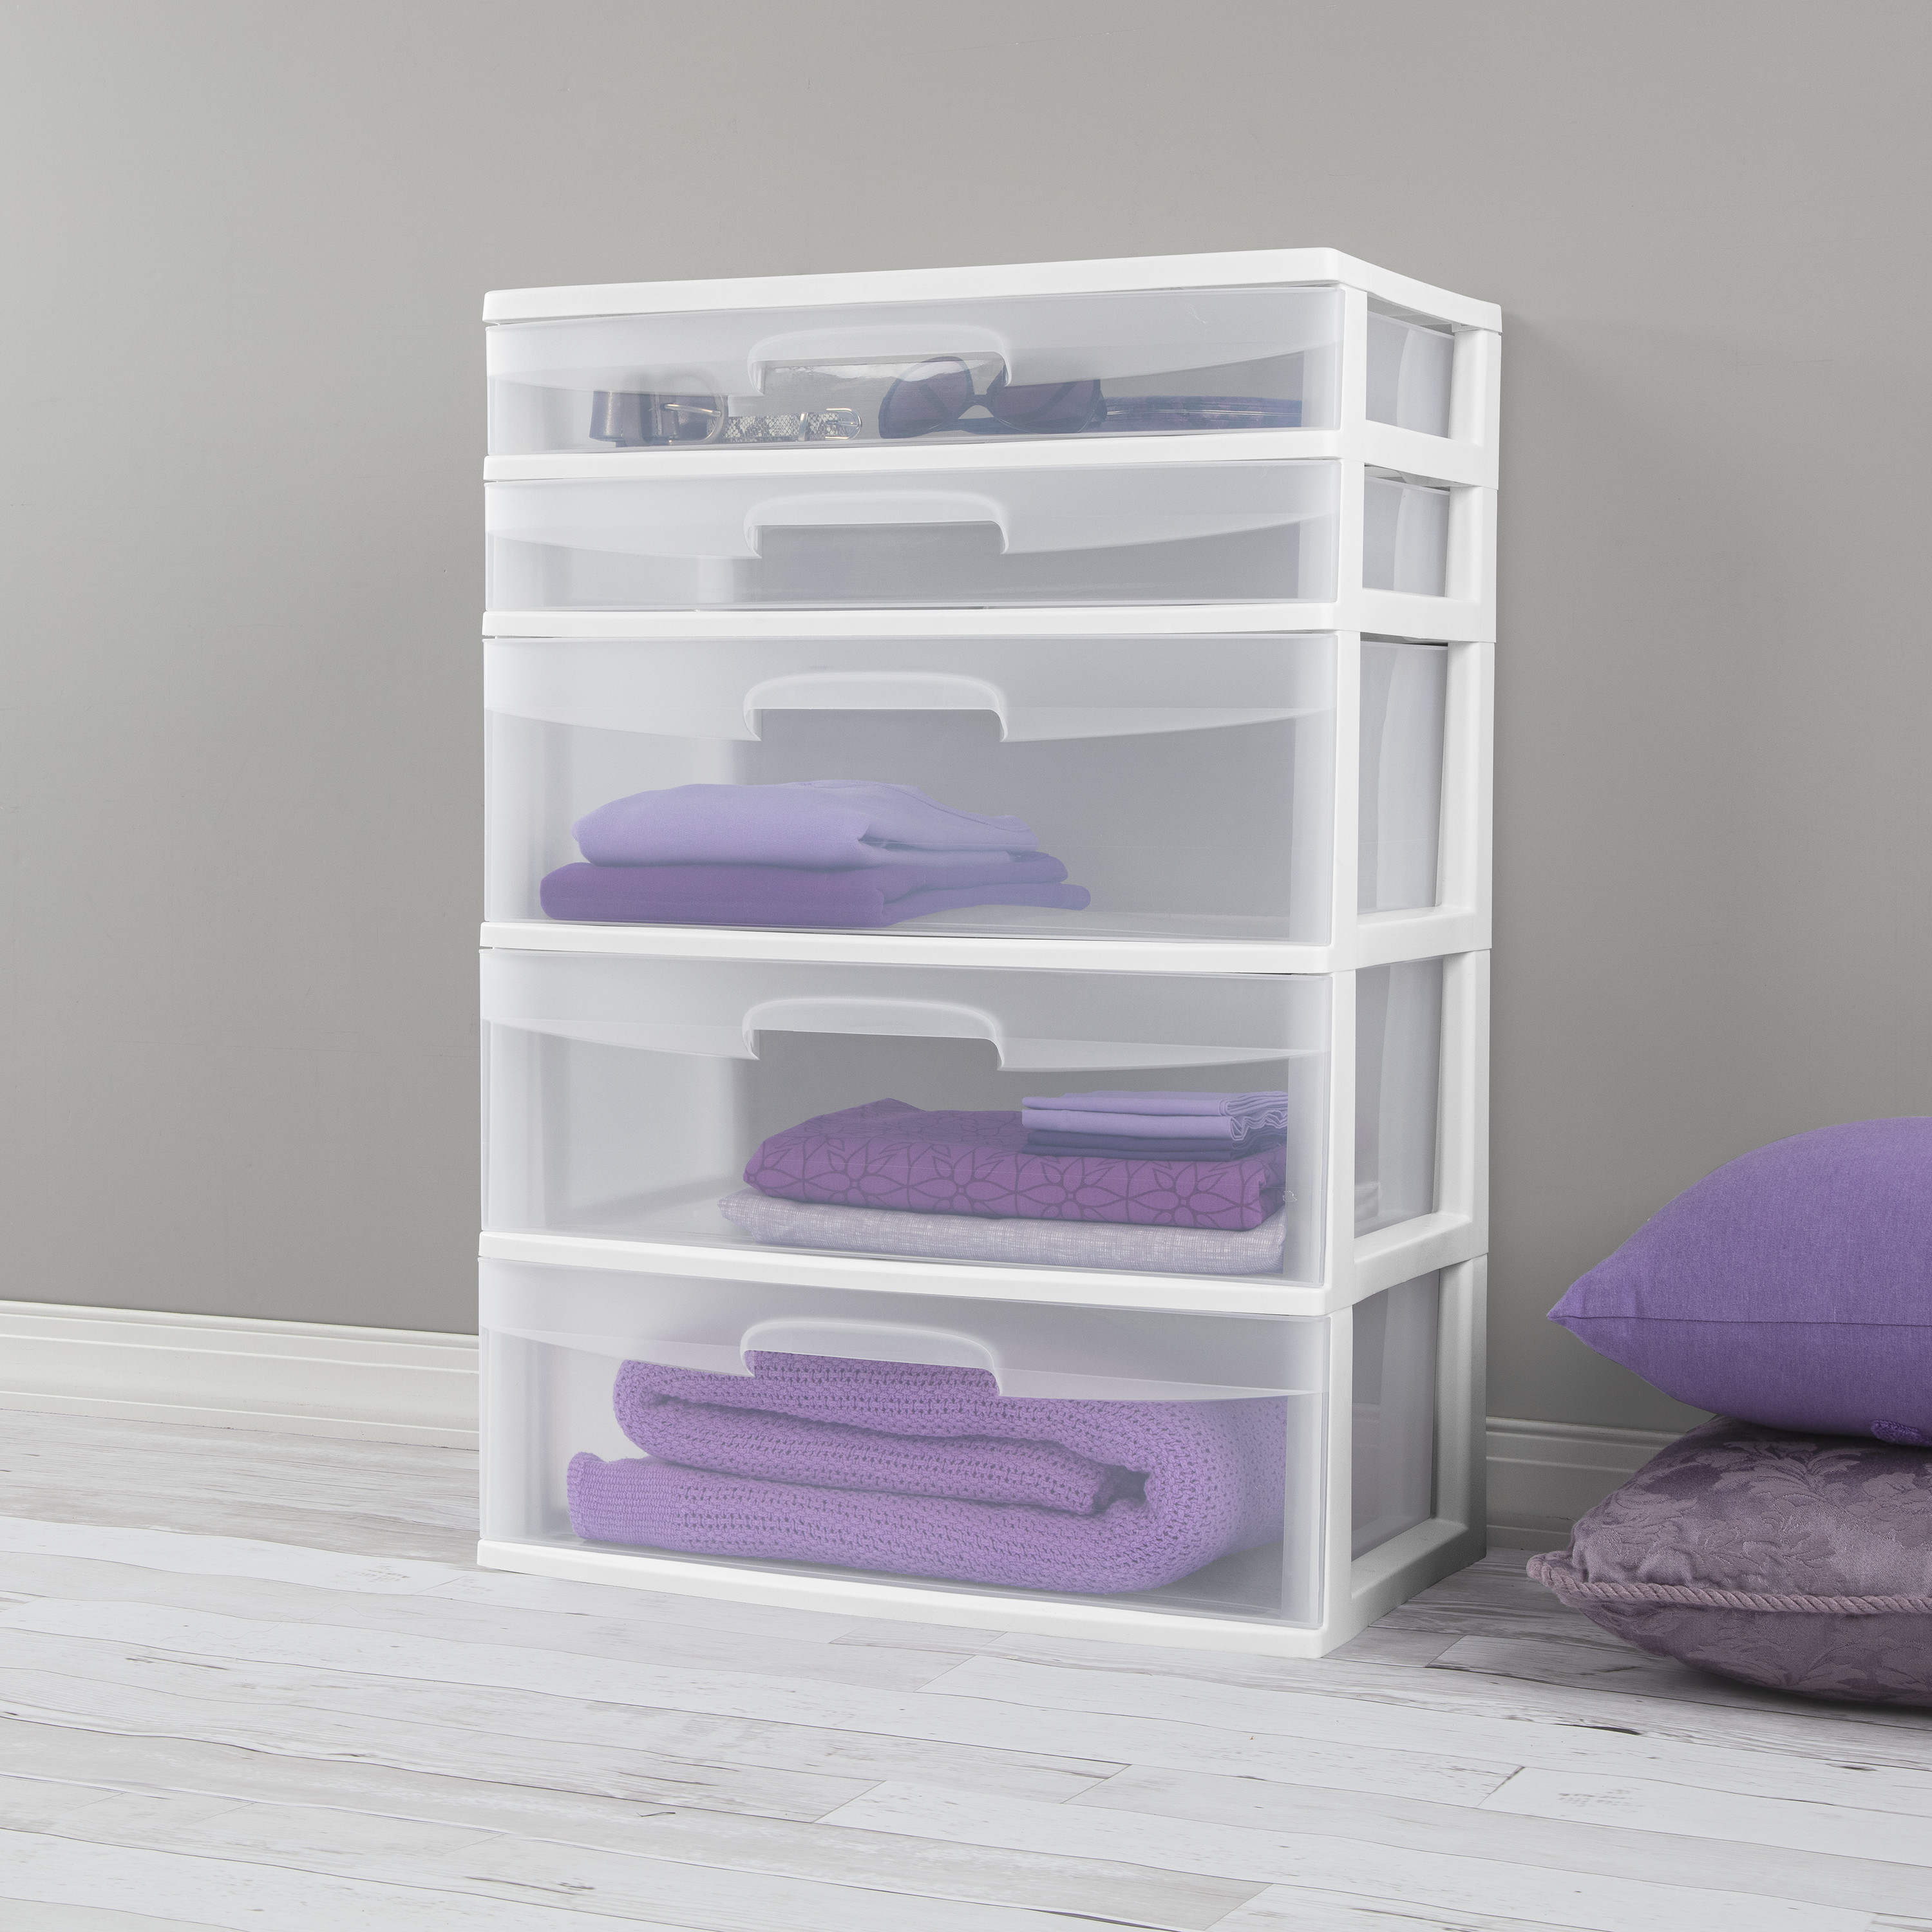 Sterilite Plastic 5 Drawer Wide Tower White - image 4 of 6